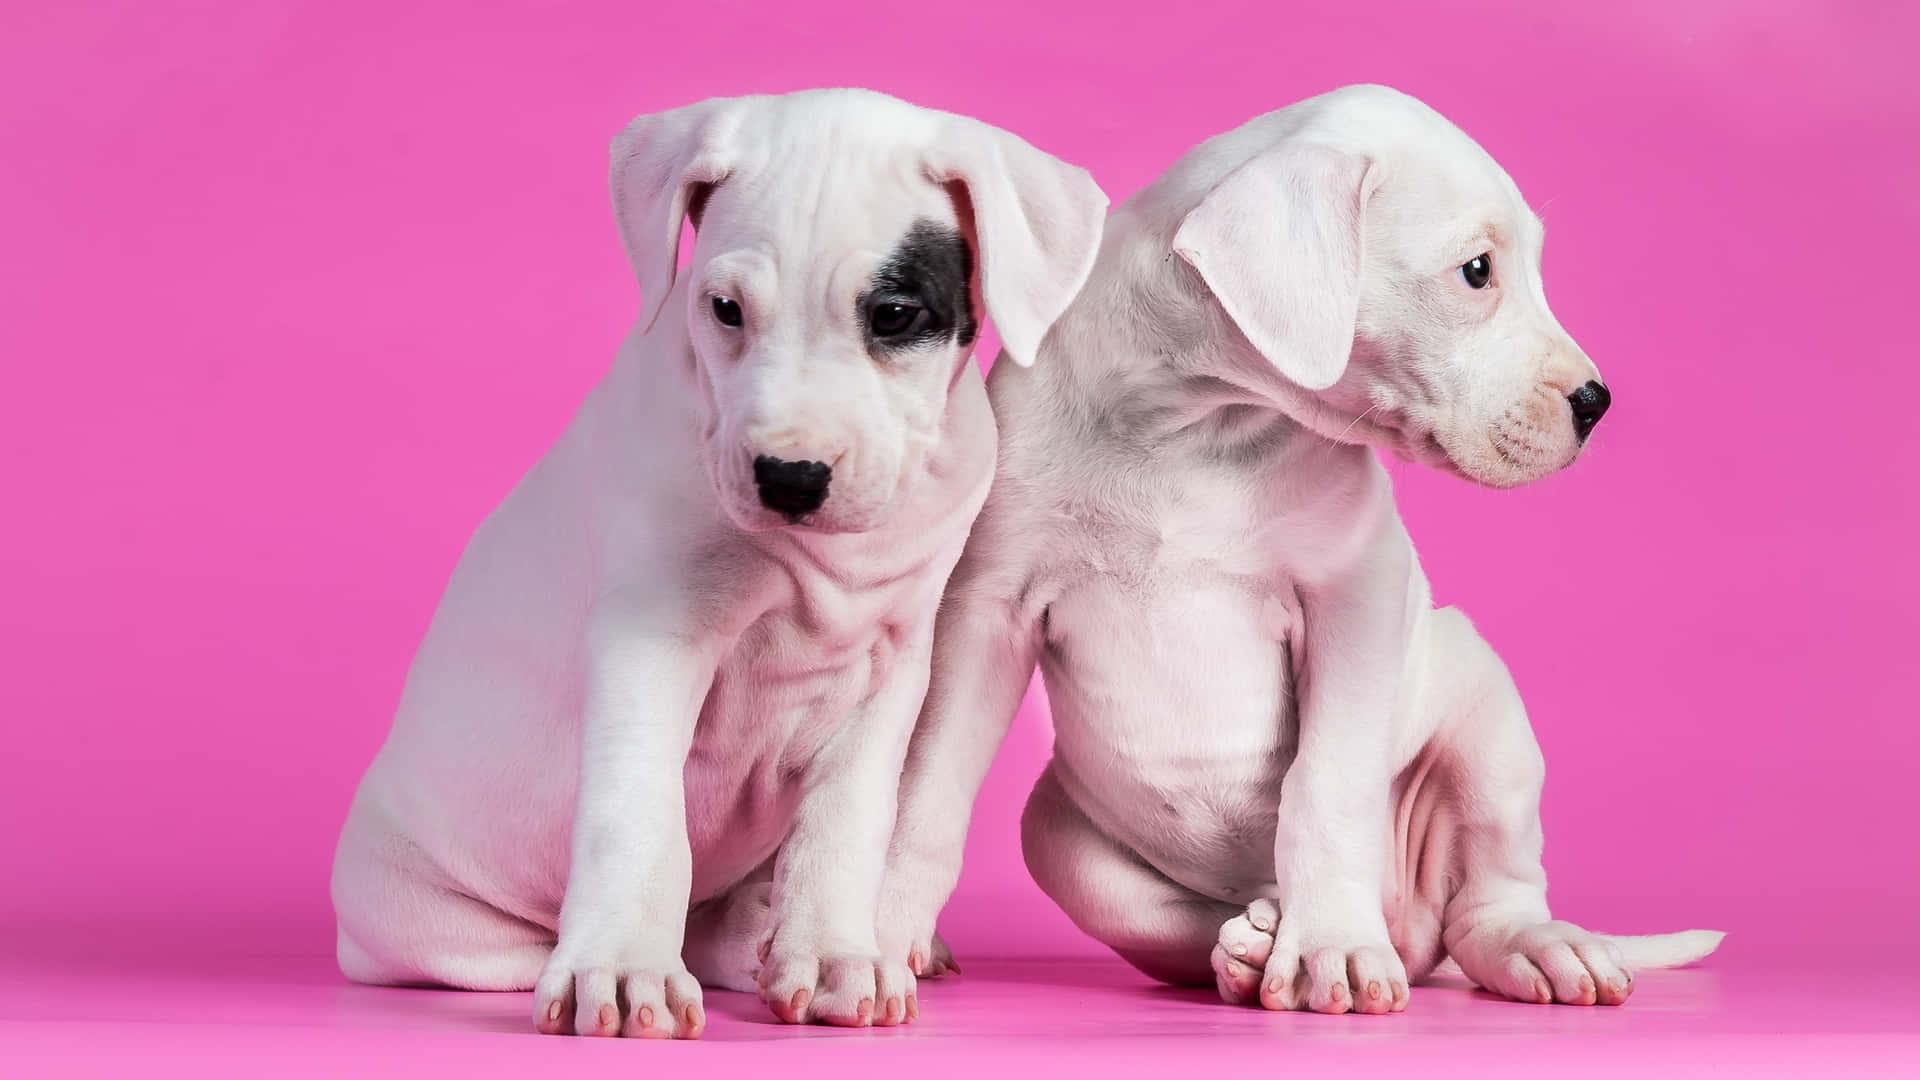 Two White Puppies Sitting On A Pink Background